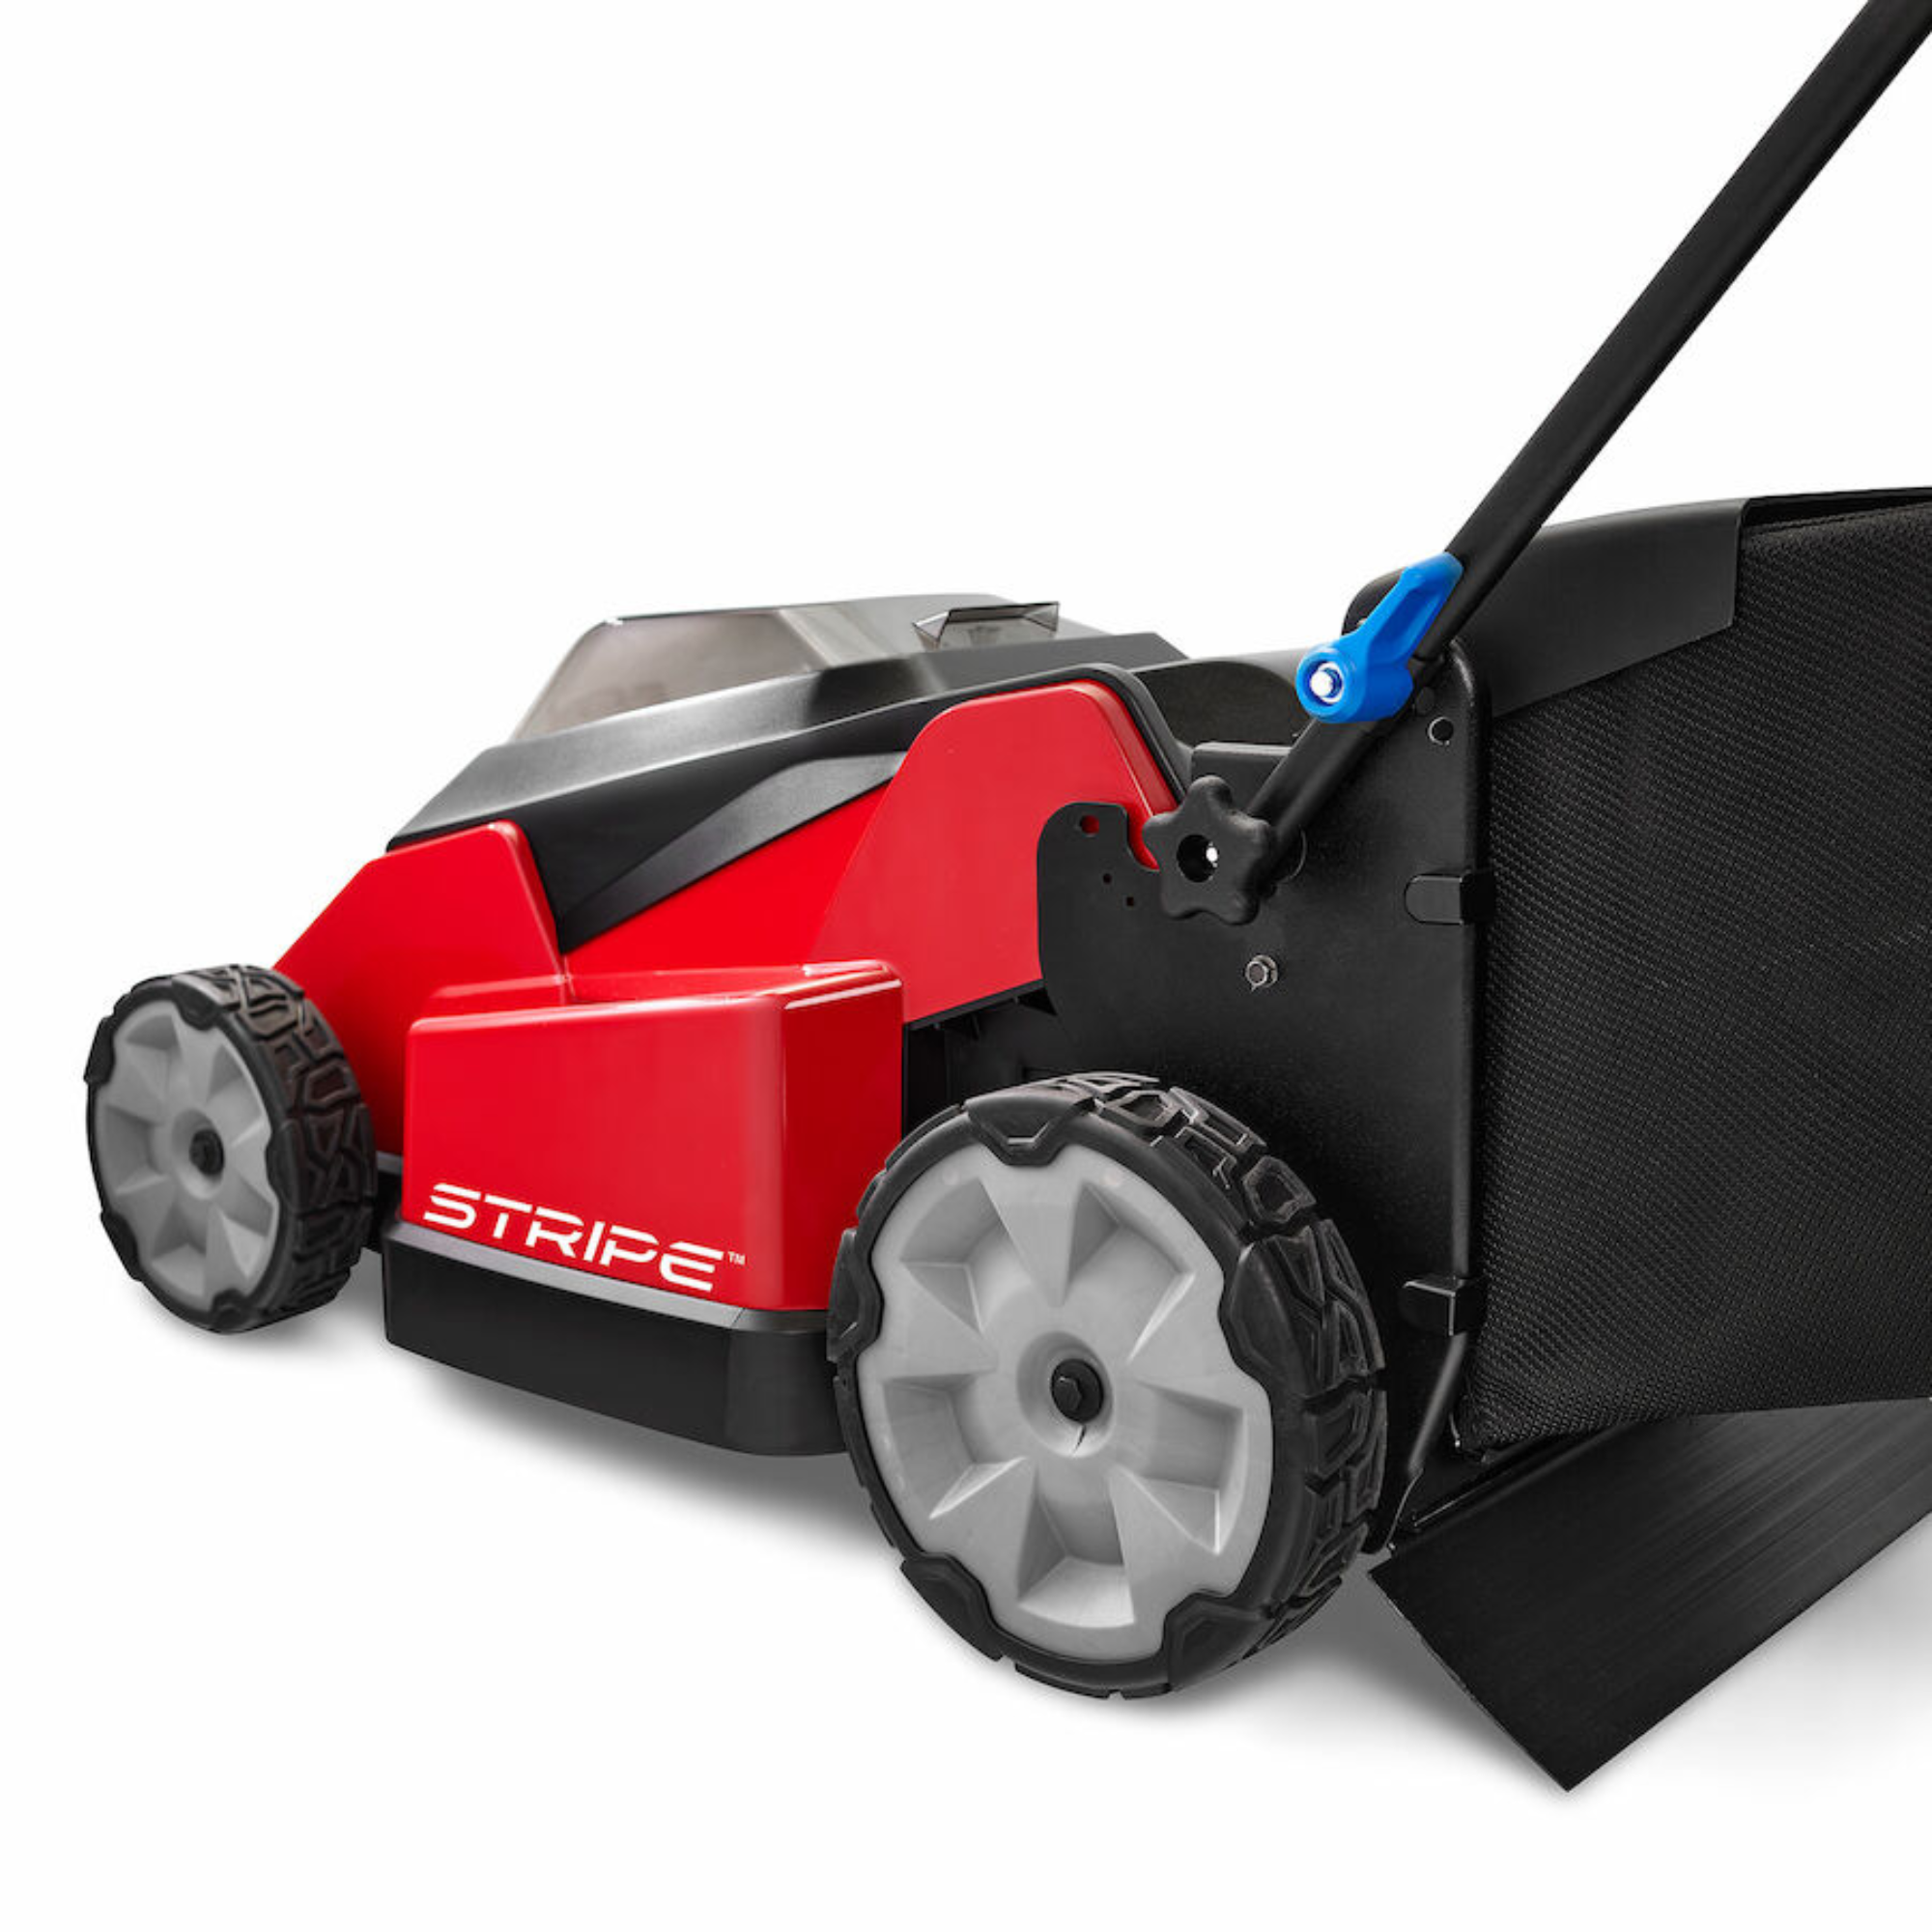 Toro 60V MAX Stripe Self-Propelled Mower - 6.0Ah Battery / Charger Included | 21 in. Deck | 21621